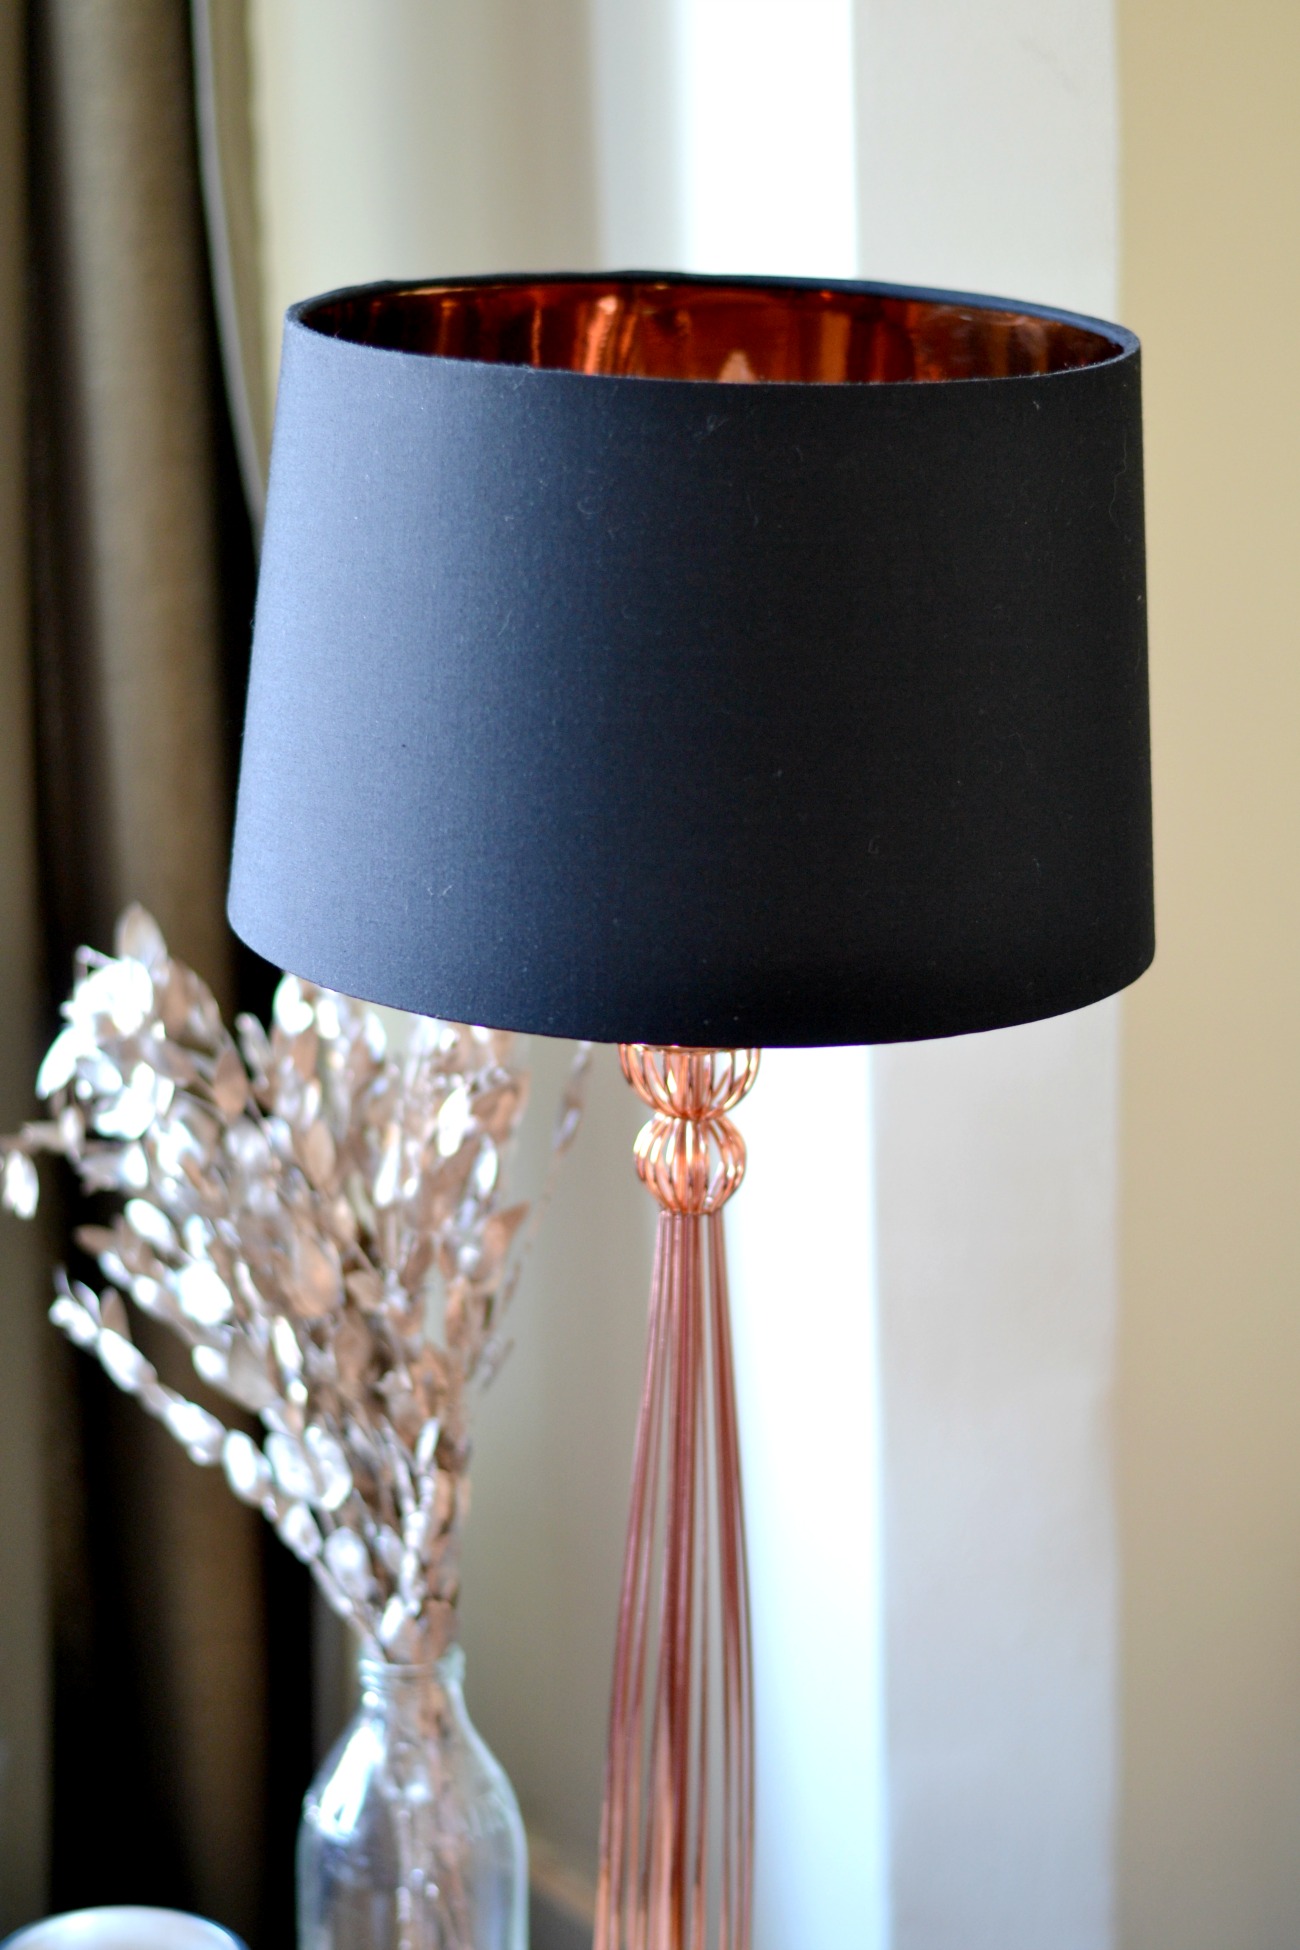 The Copper Table Lamp | First Choice Lighting Review